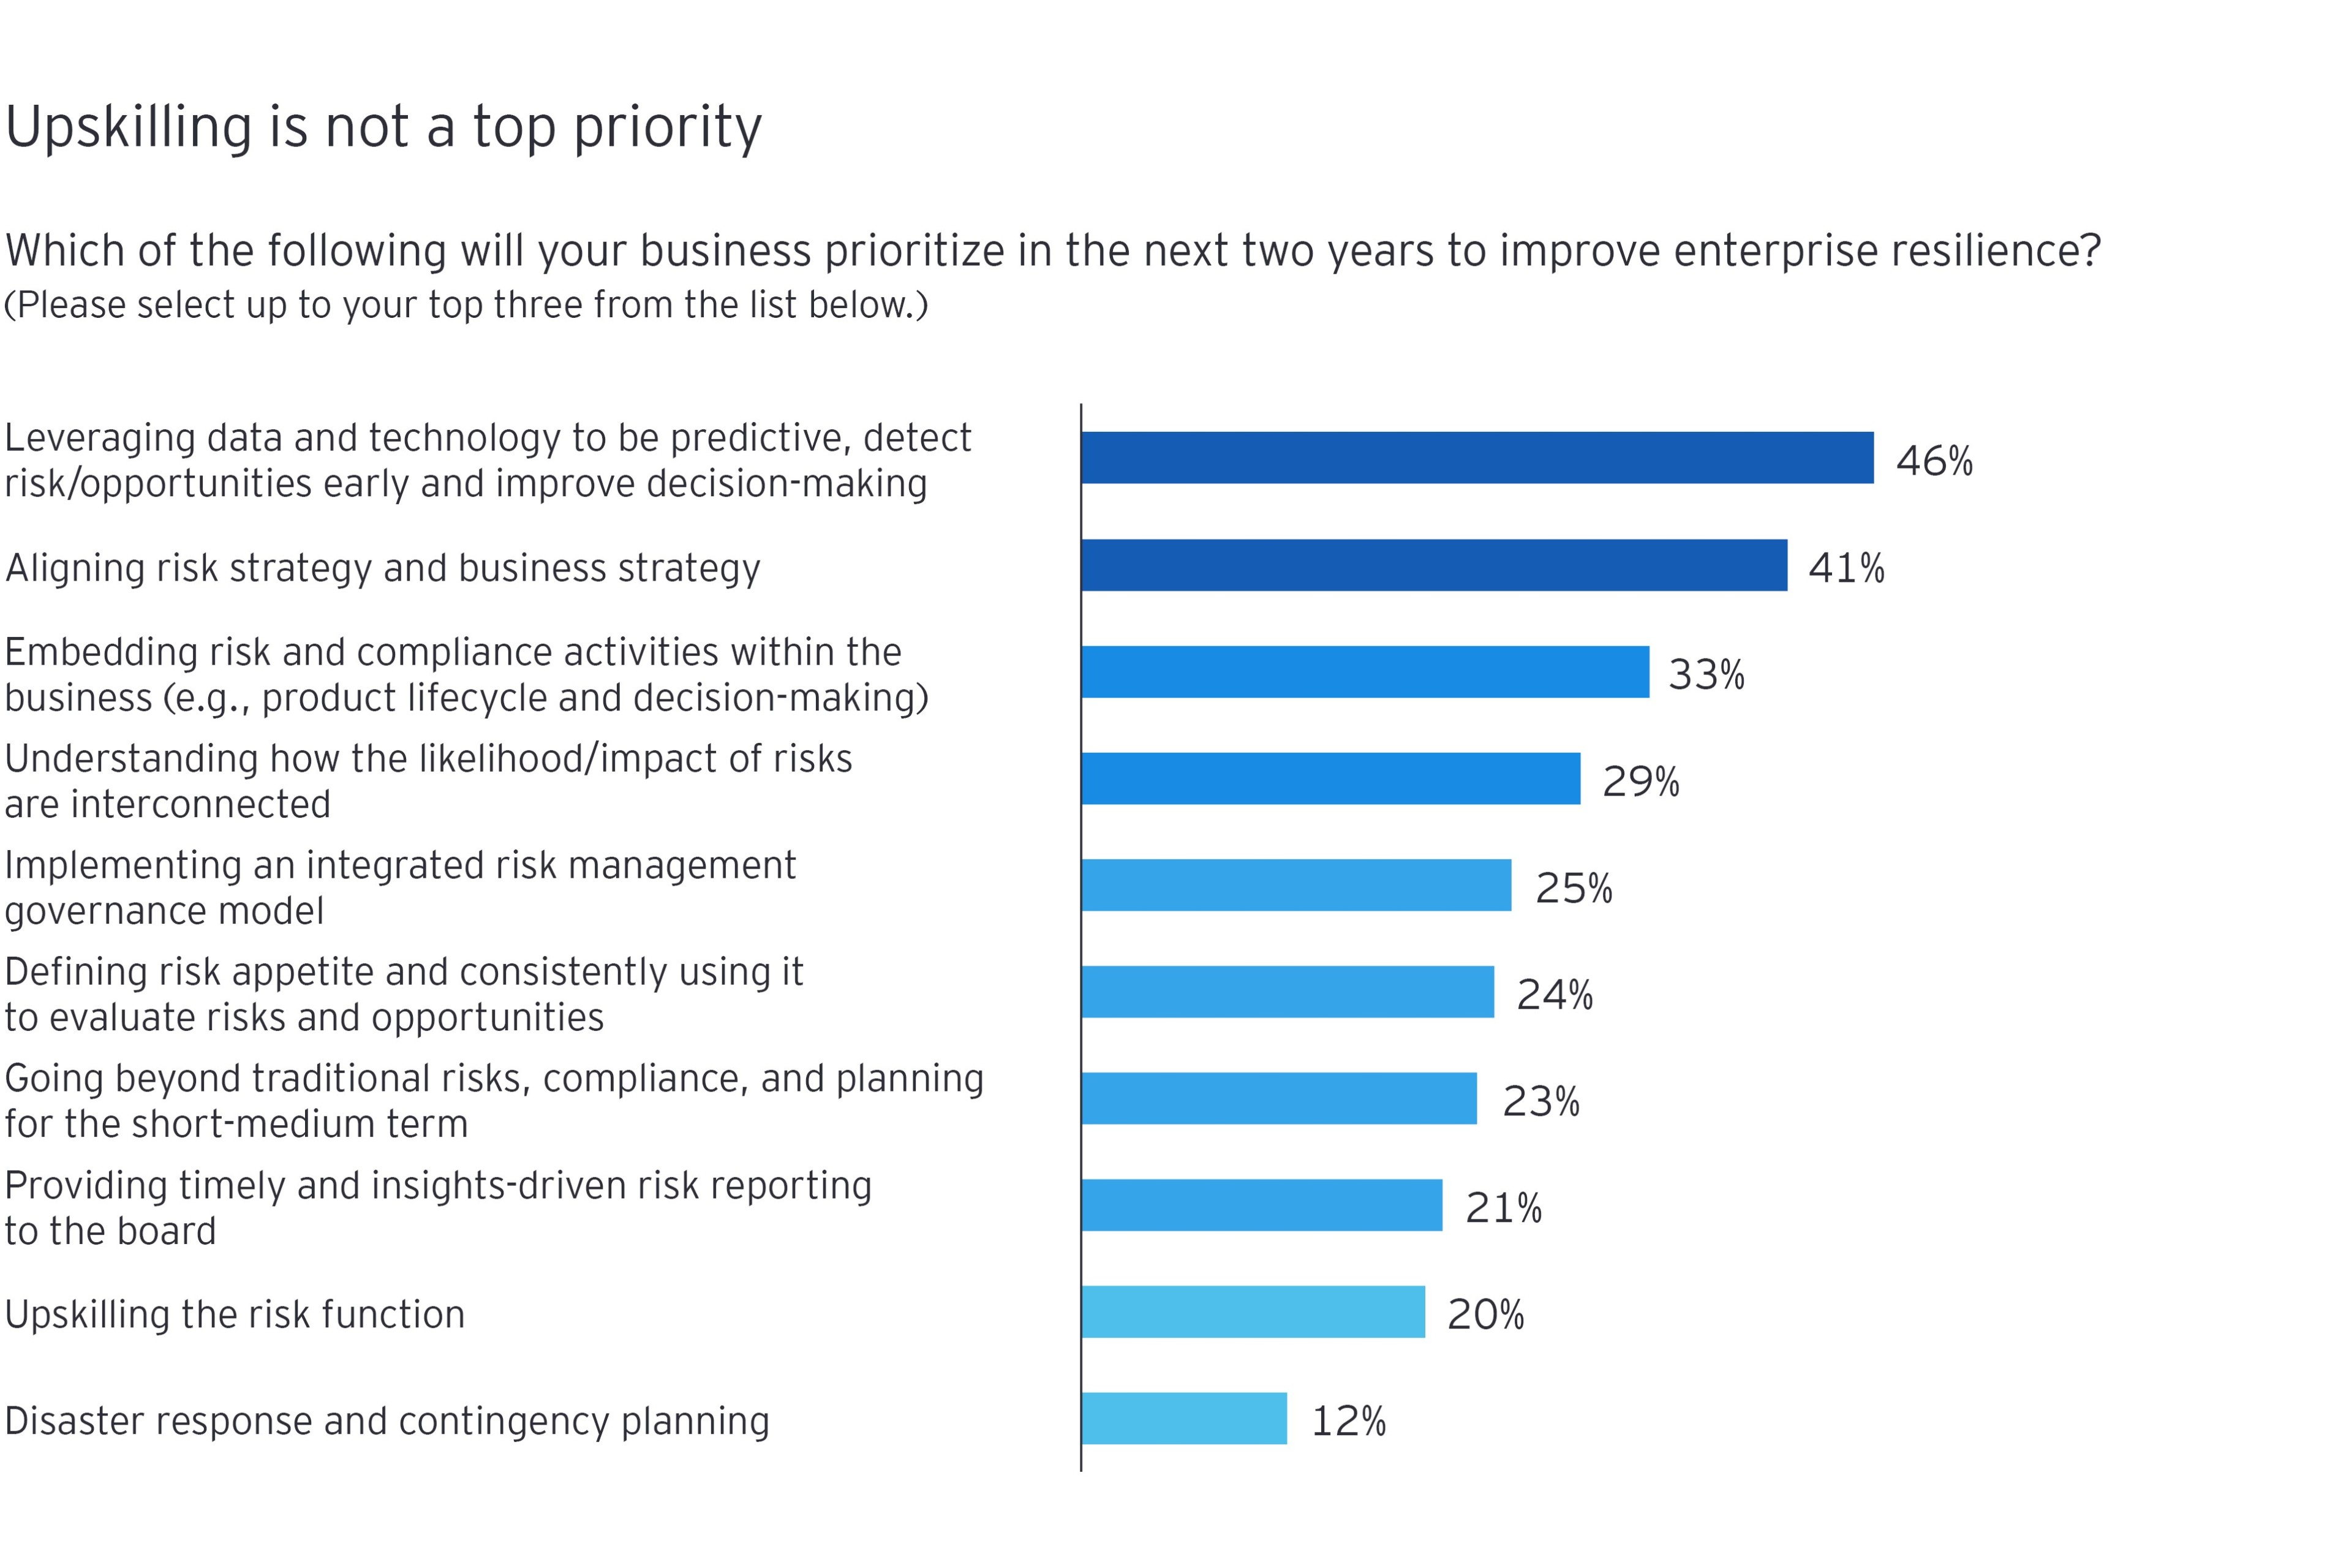 Chart highlighting leading survey responses to “Which of the following will your business prioritize in the next two years to improve enterprise resilience?”